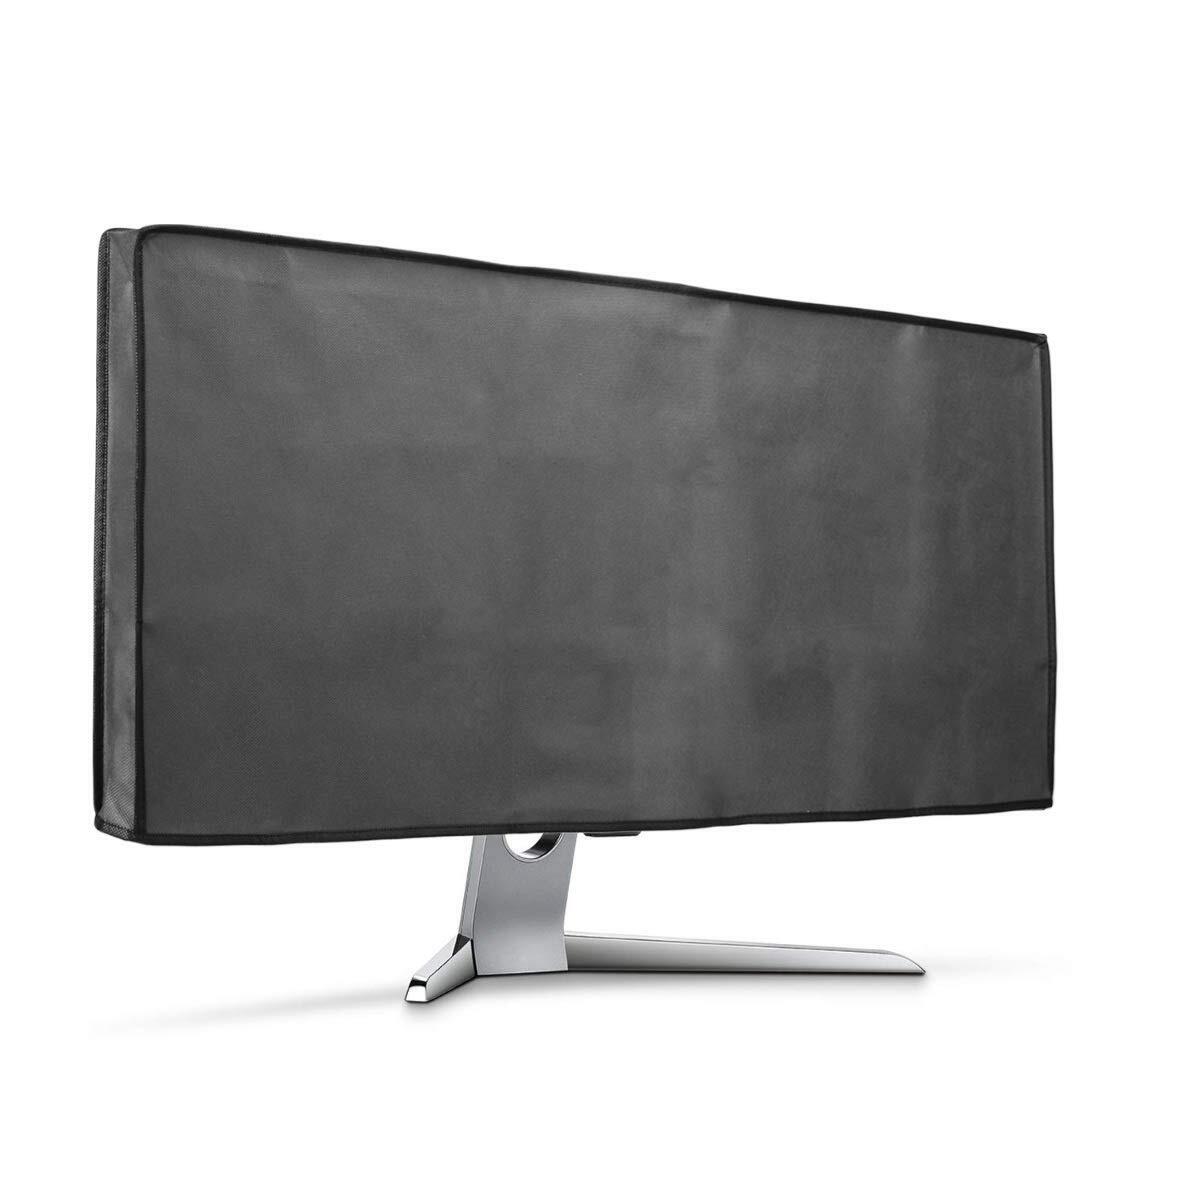 Monitor Cover Compatible with 34-35 monitor - Dust Cover Computer Screen Pro